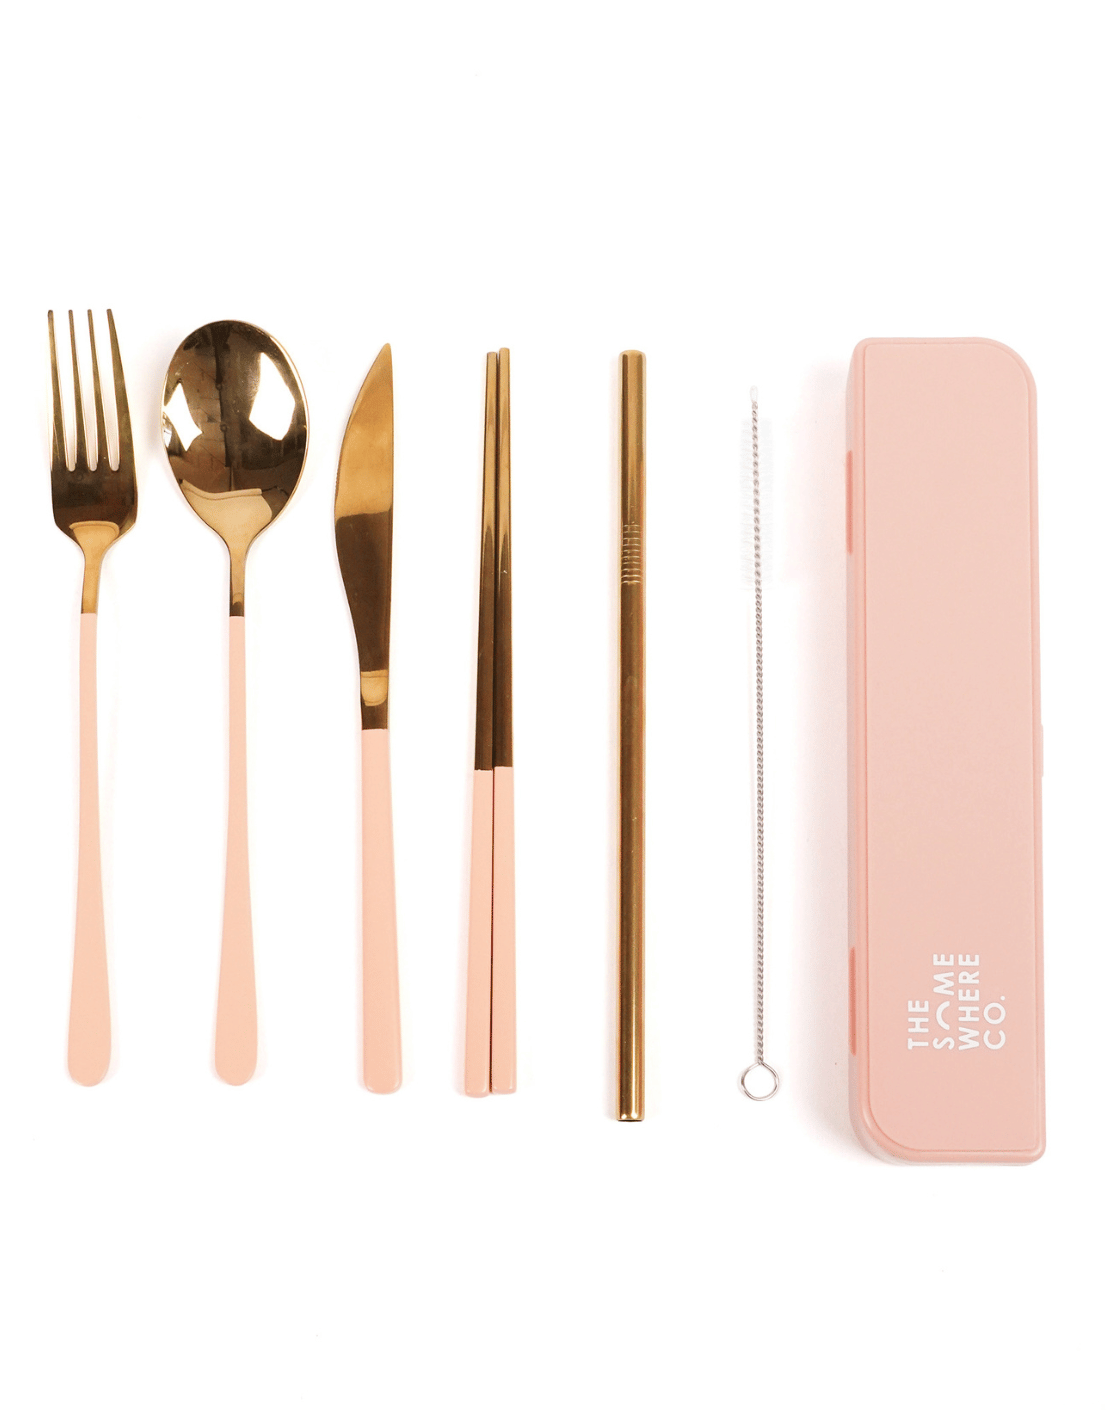 Cutlery Kit - Gold with Blush Handle (PRE-ORDER)